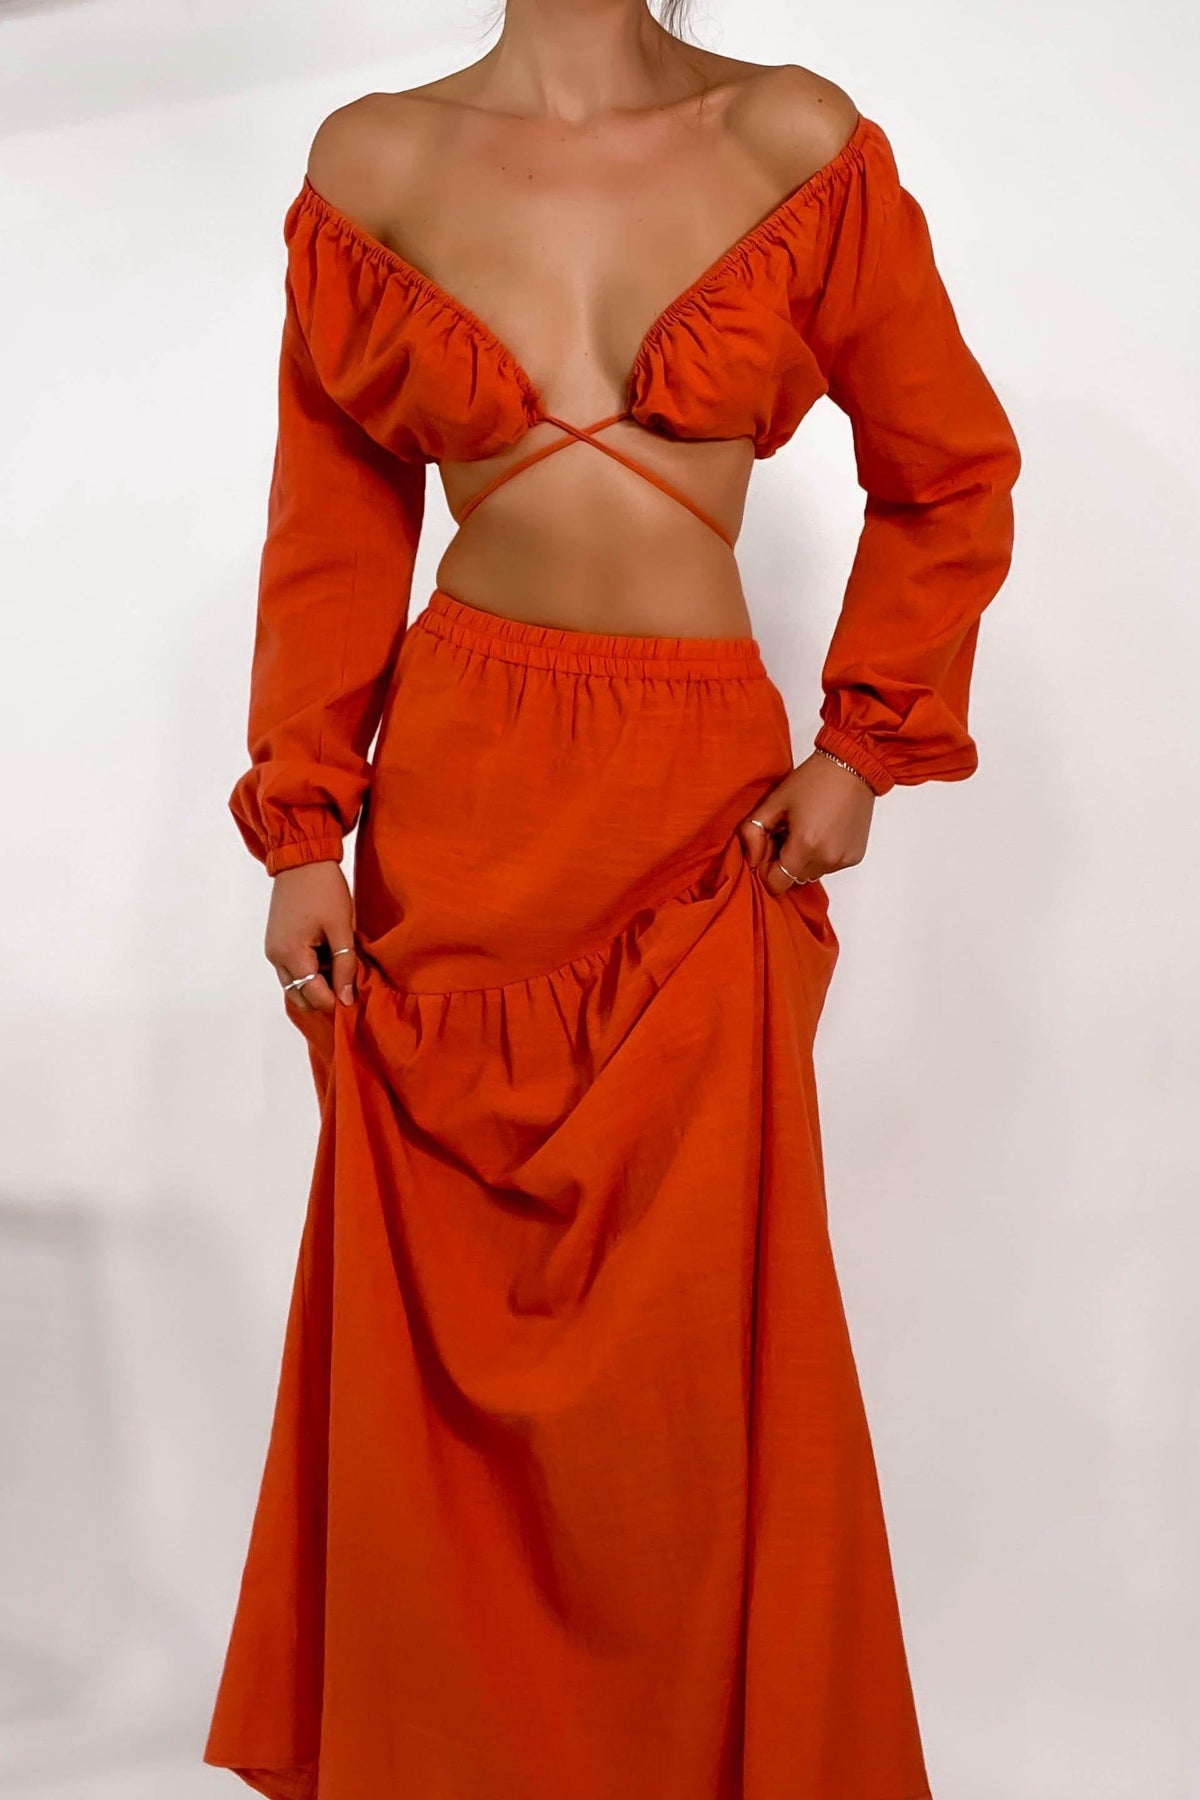 Laveria Skirt, BOTTOMS, COTTON, MAXI DRESS, MIDI SKIRT, ORANGE, RED, SETS, SKIRTS, , Our New Laveria Skirt is only $61.00-We Have The Latest Pants | Shorts | Skirts @ Mishkah Online Fashion Boutique-MISHKAH